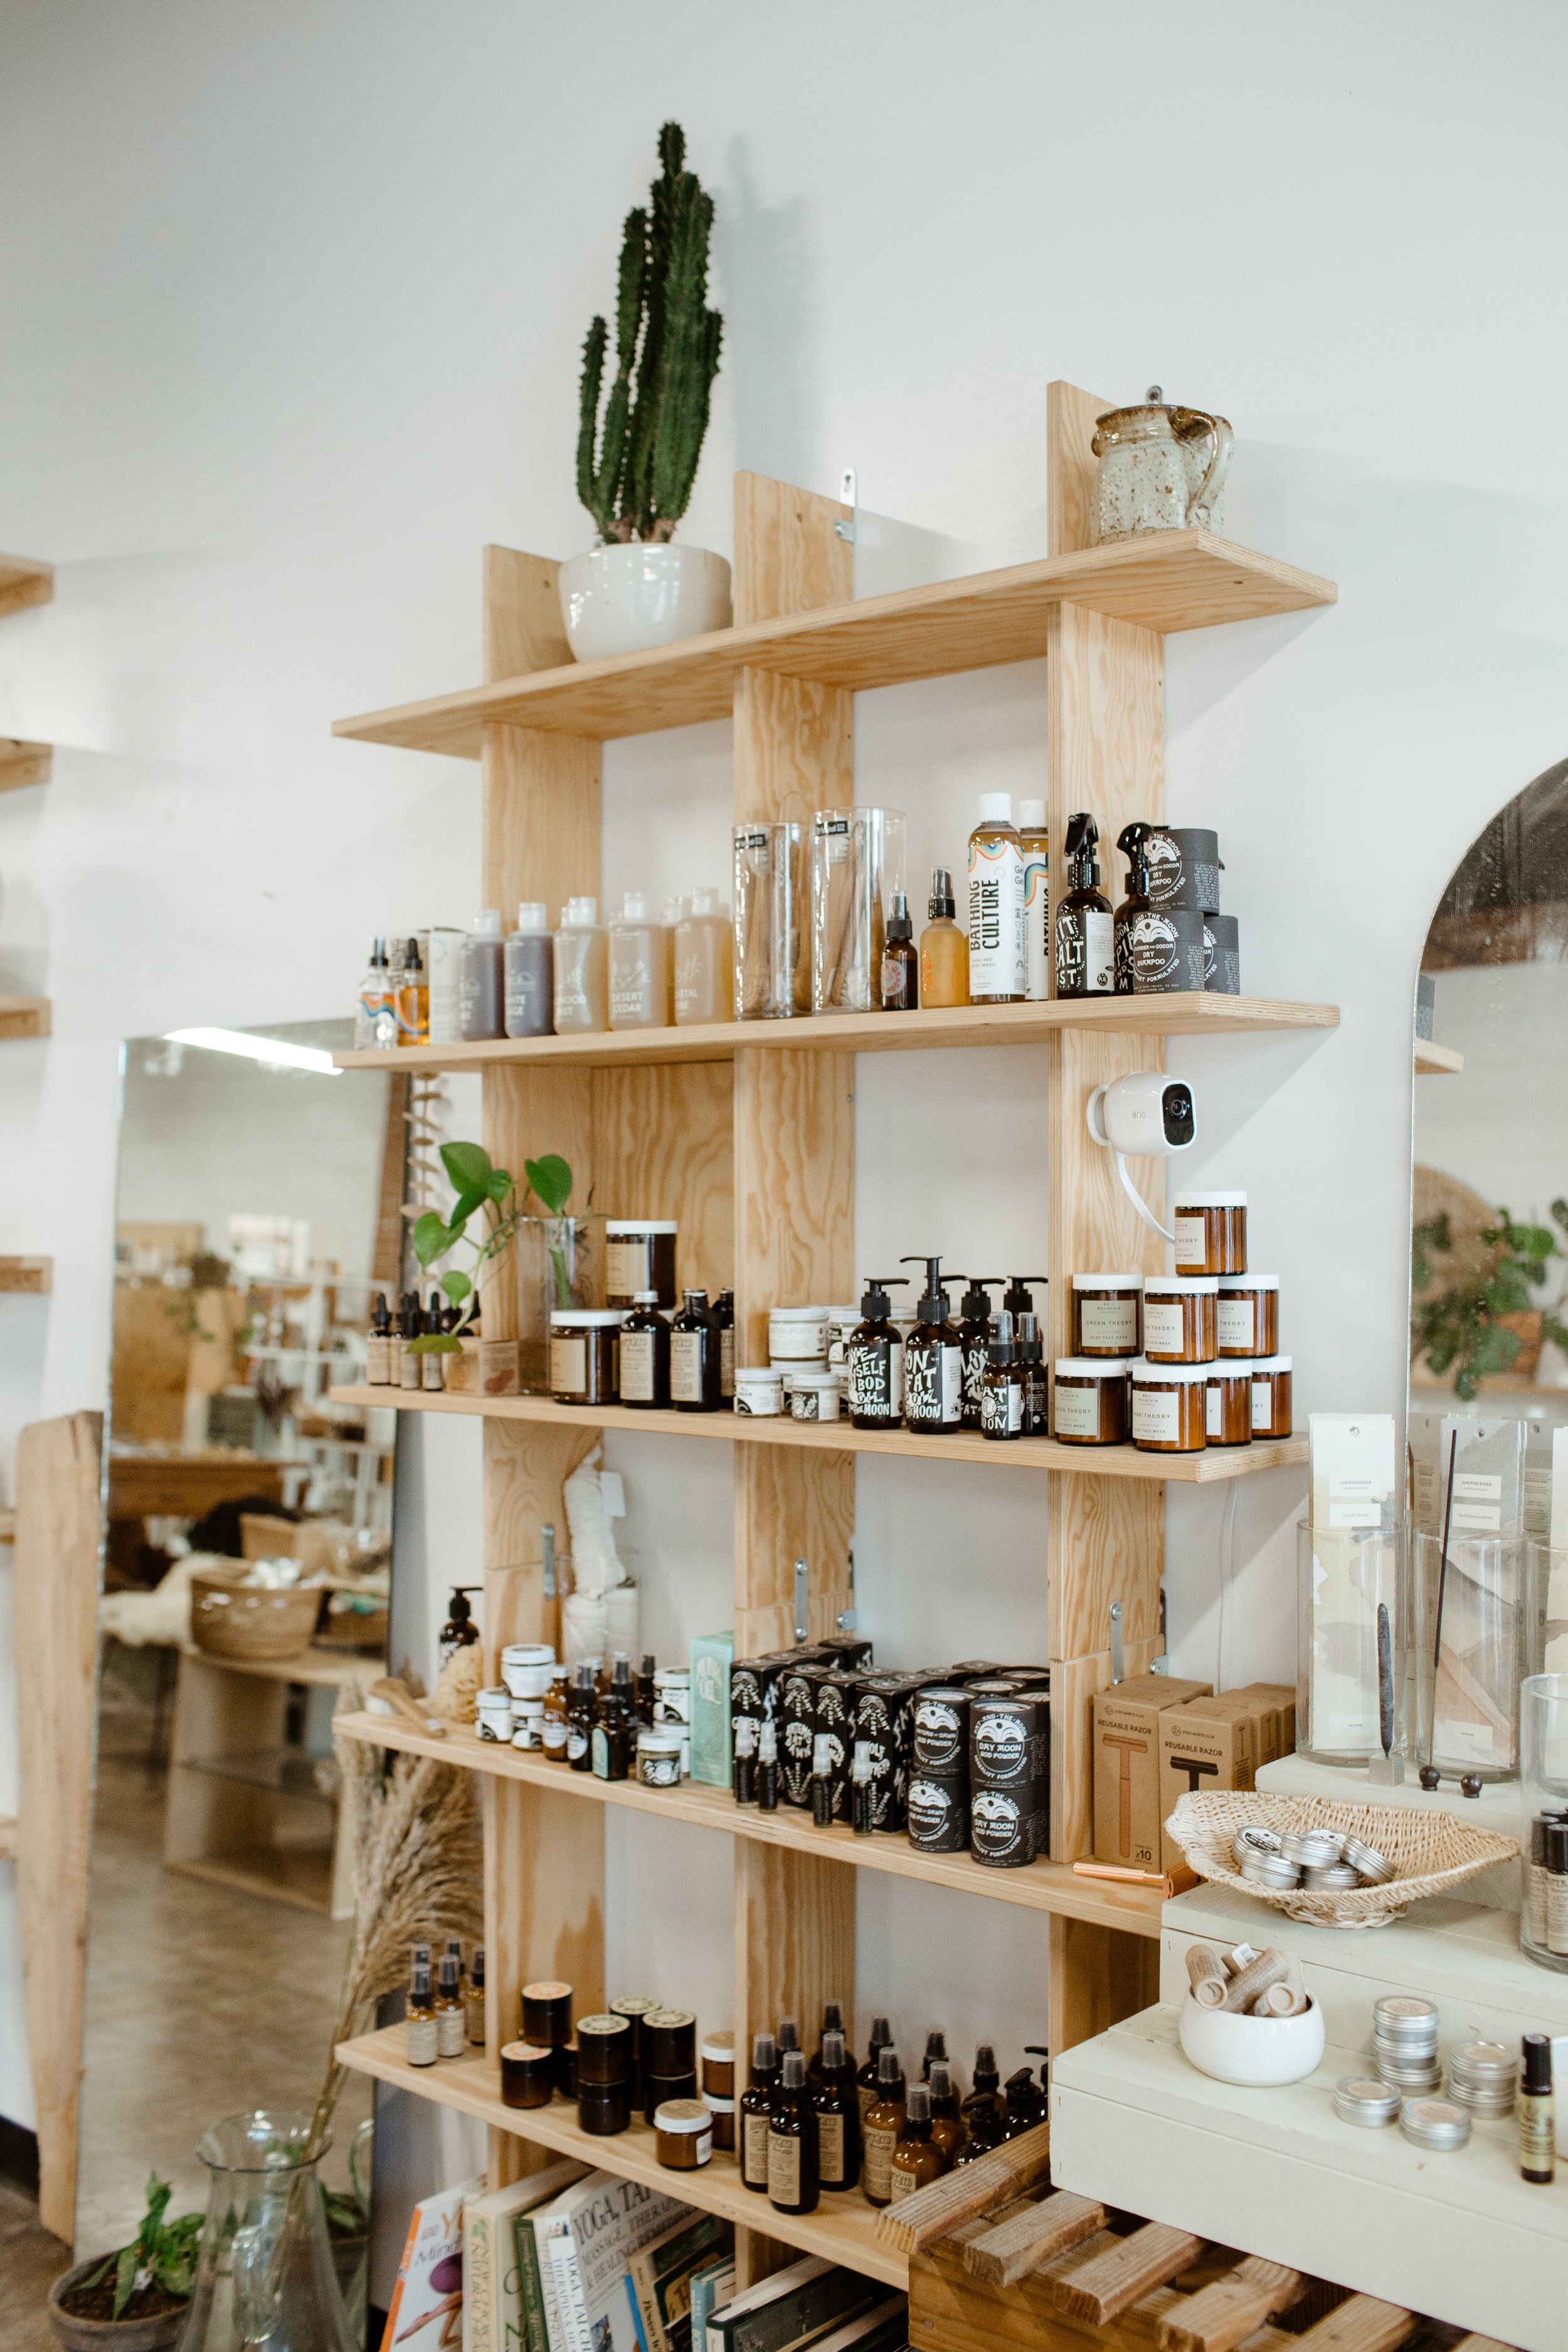 Shelving in a lifestyle store displaying beautiful skincare products